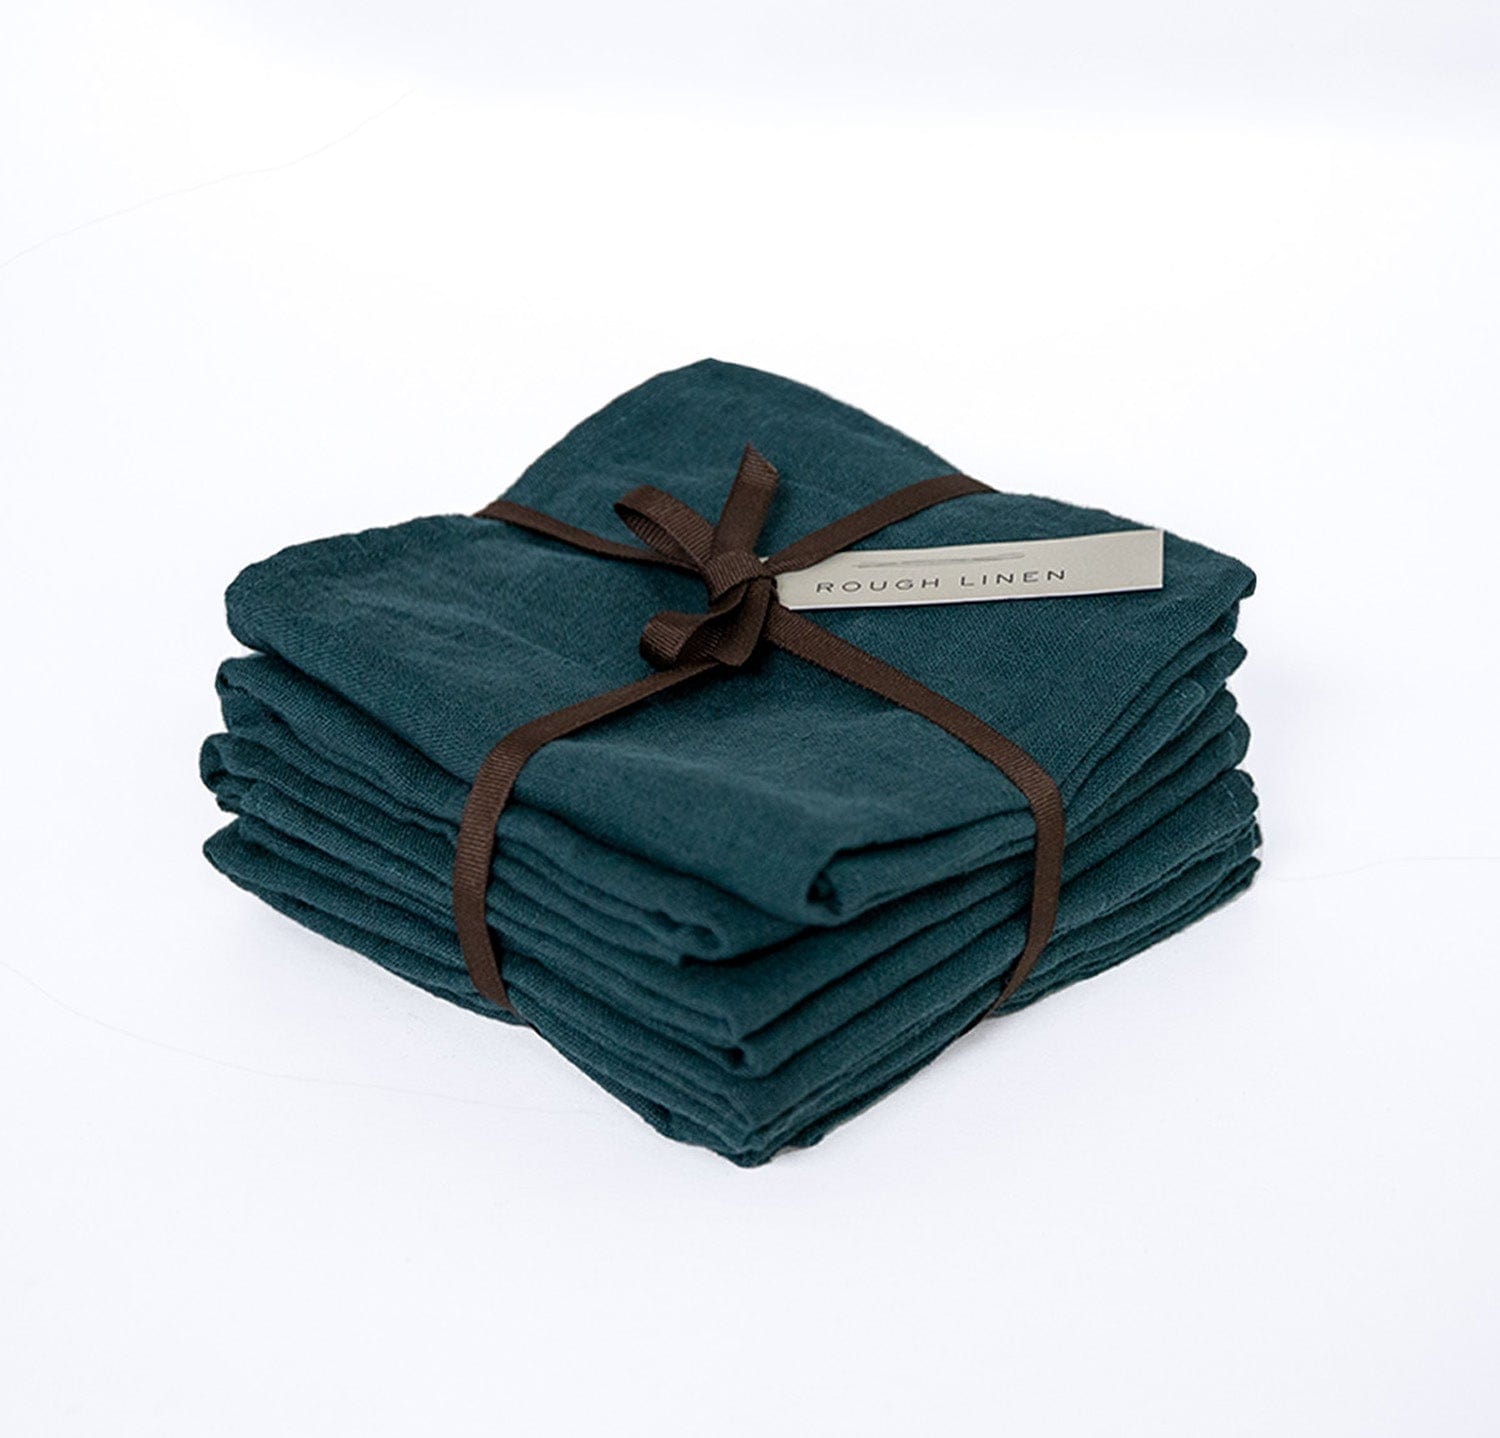 Buy Set of 2 Linen Tea Towels Navy With Natural. Washed Linen